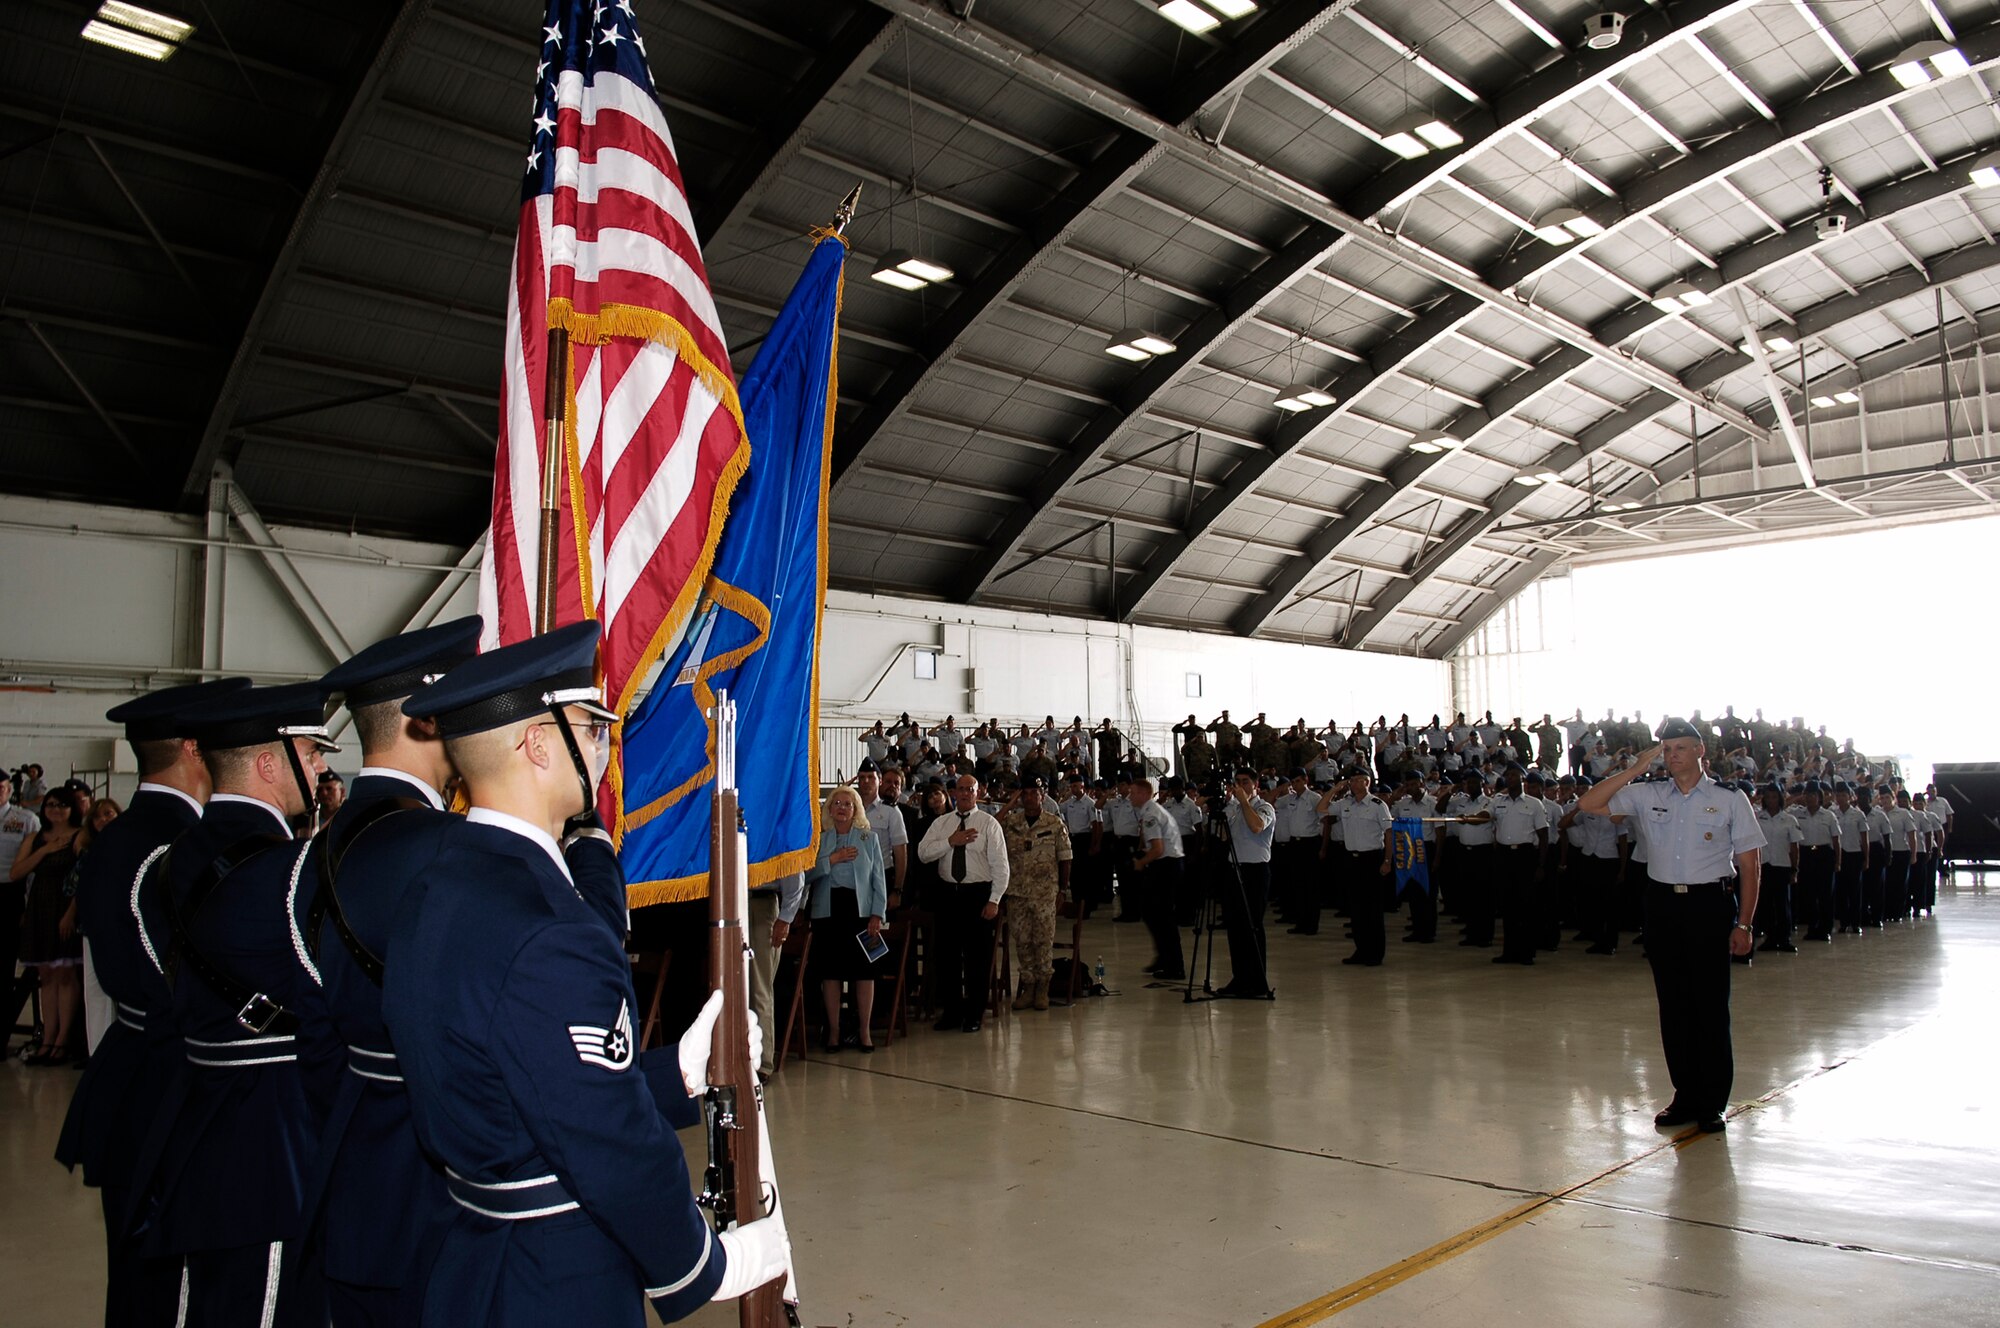 Members of MacDill Air Force Base, Fla., and the Tampa Bay community stand for the National Anthem Monday during a change of command ceremony for the 6th Air Mobility Wing. Col. Robert Thomas relinquished command to Col. Lawrence Martin. (U.S. Air Force photo/Tech. Sgt. Sean White)
